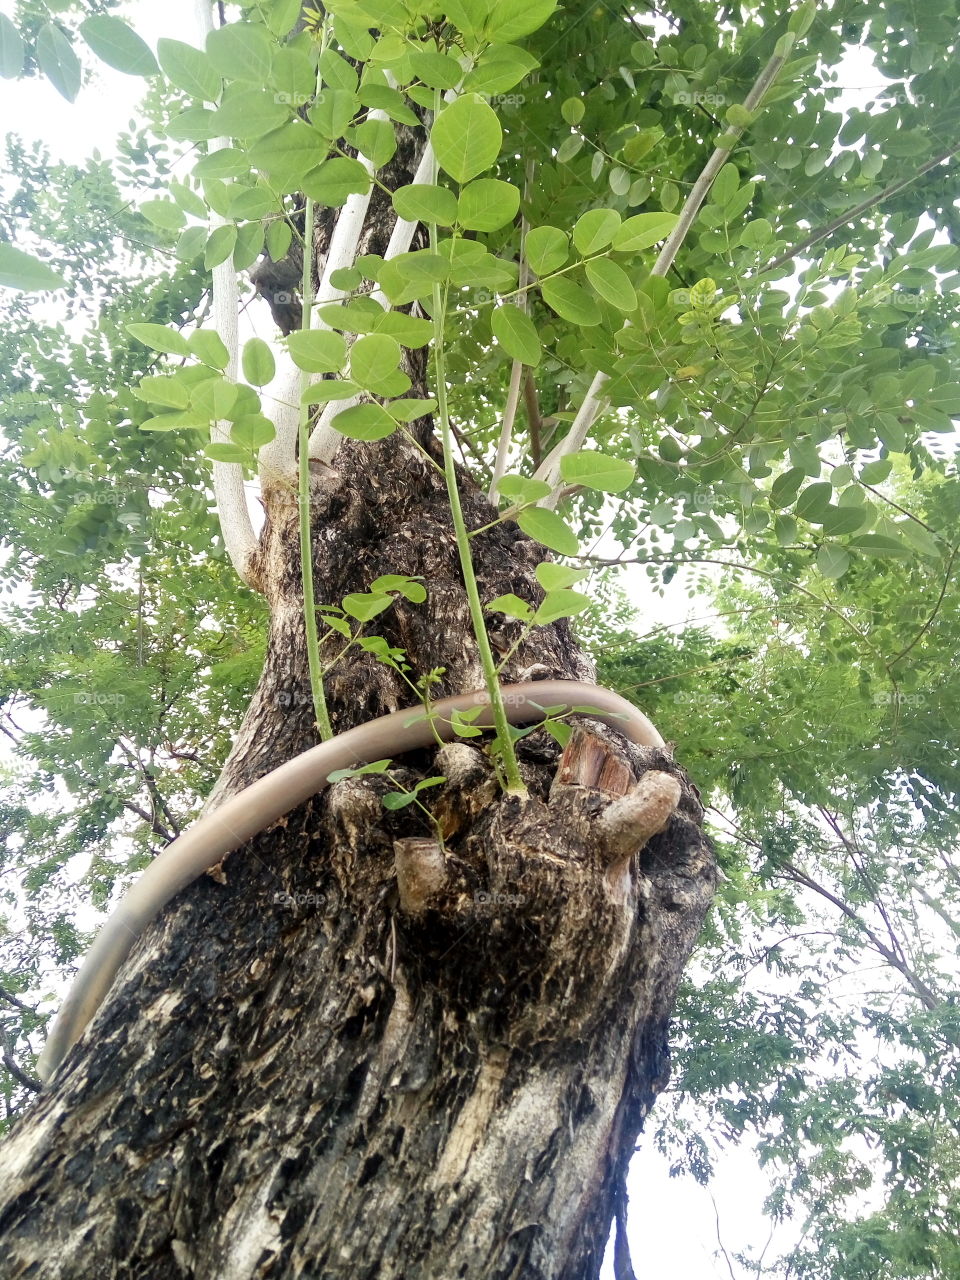 focus on body of the tree that has a lot of new branches.